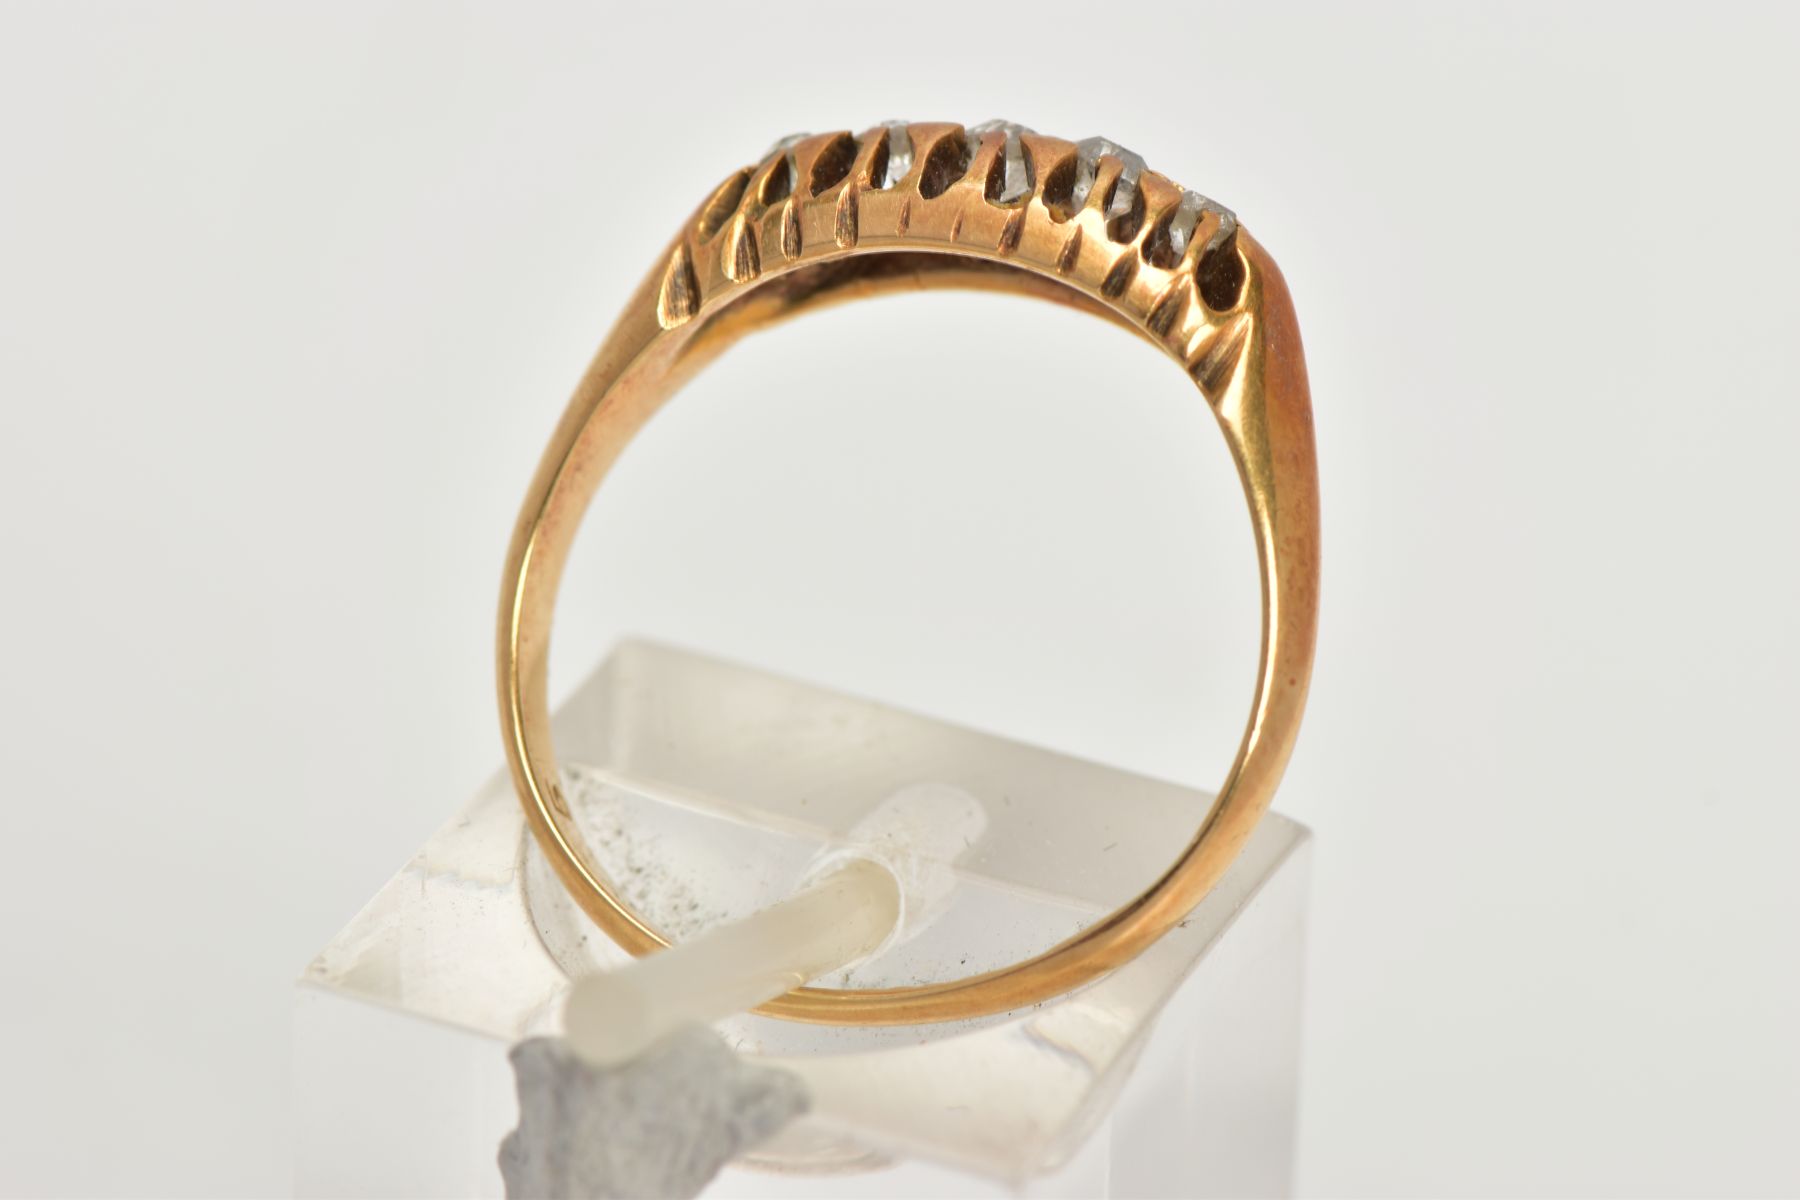 AN 18CT GOLD DIAMOND BOAT RING, five old cut diamonds, prong set in a yellow gold mount, leading - Image 3 of 4